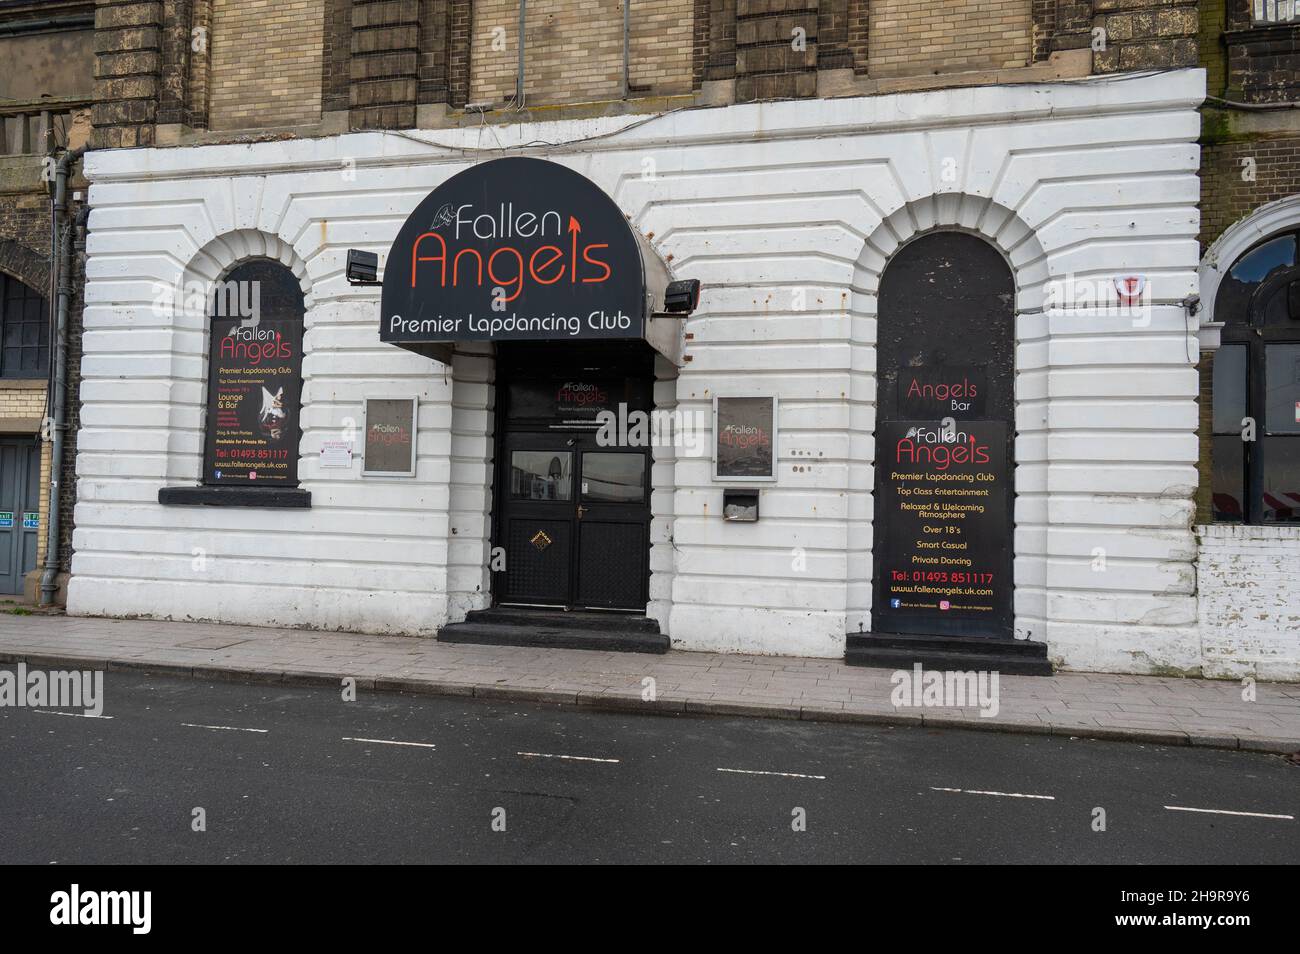 A view of the Fallen Angels lap dancing club in Great Yarmouth Stock Photo